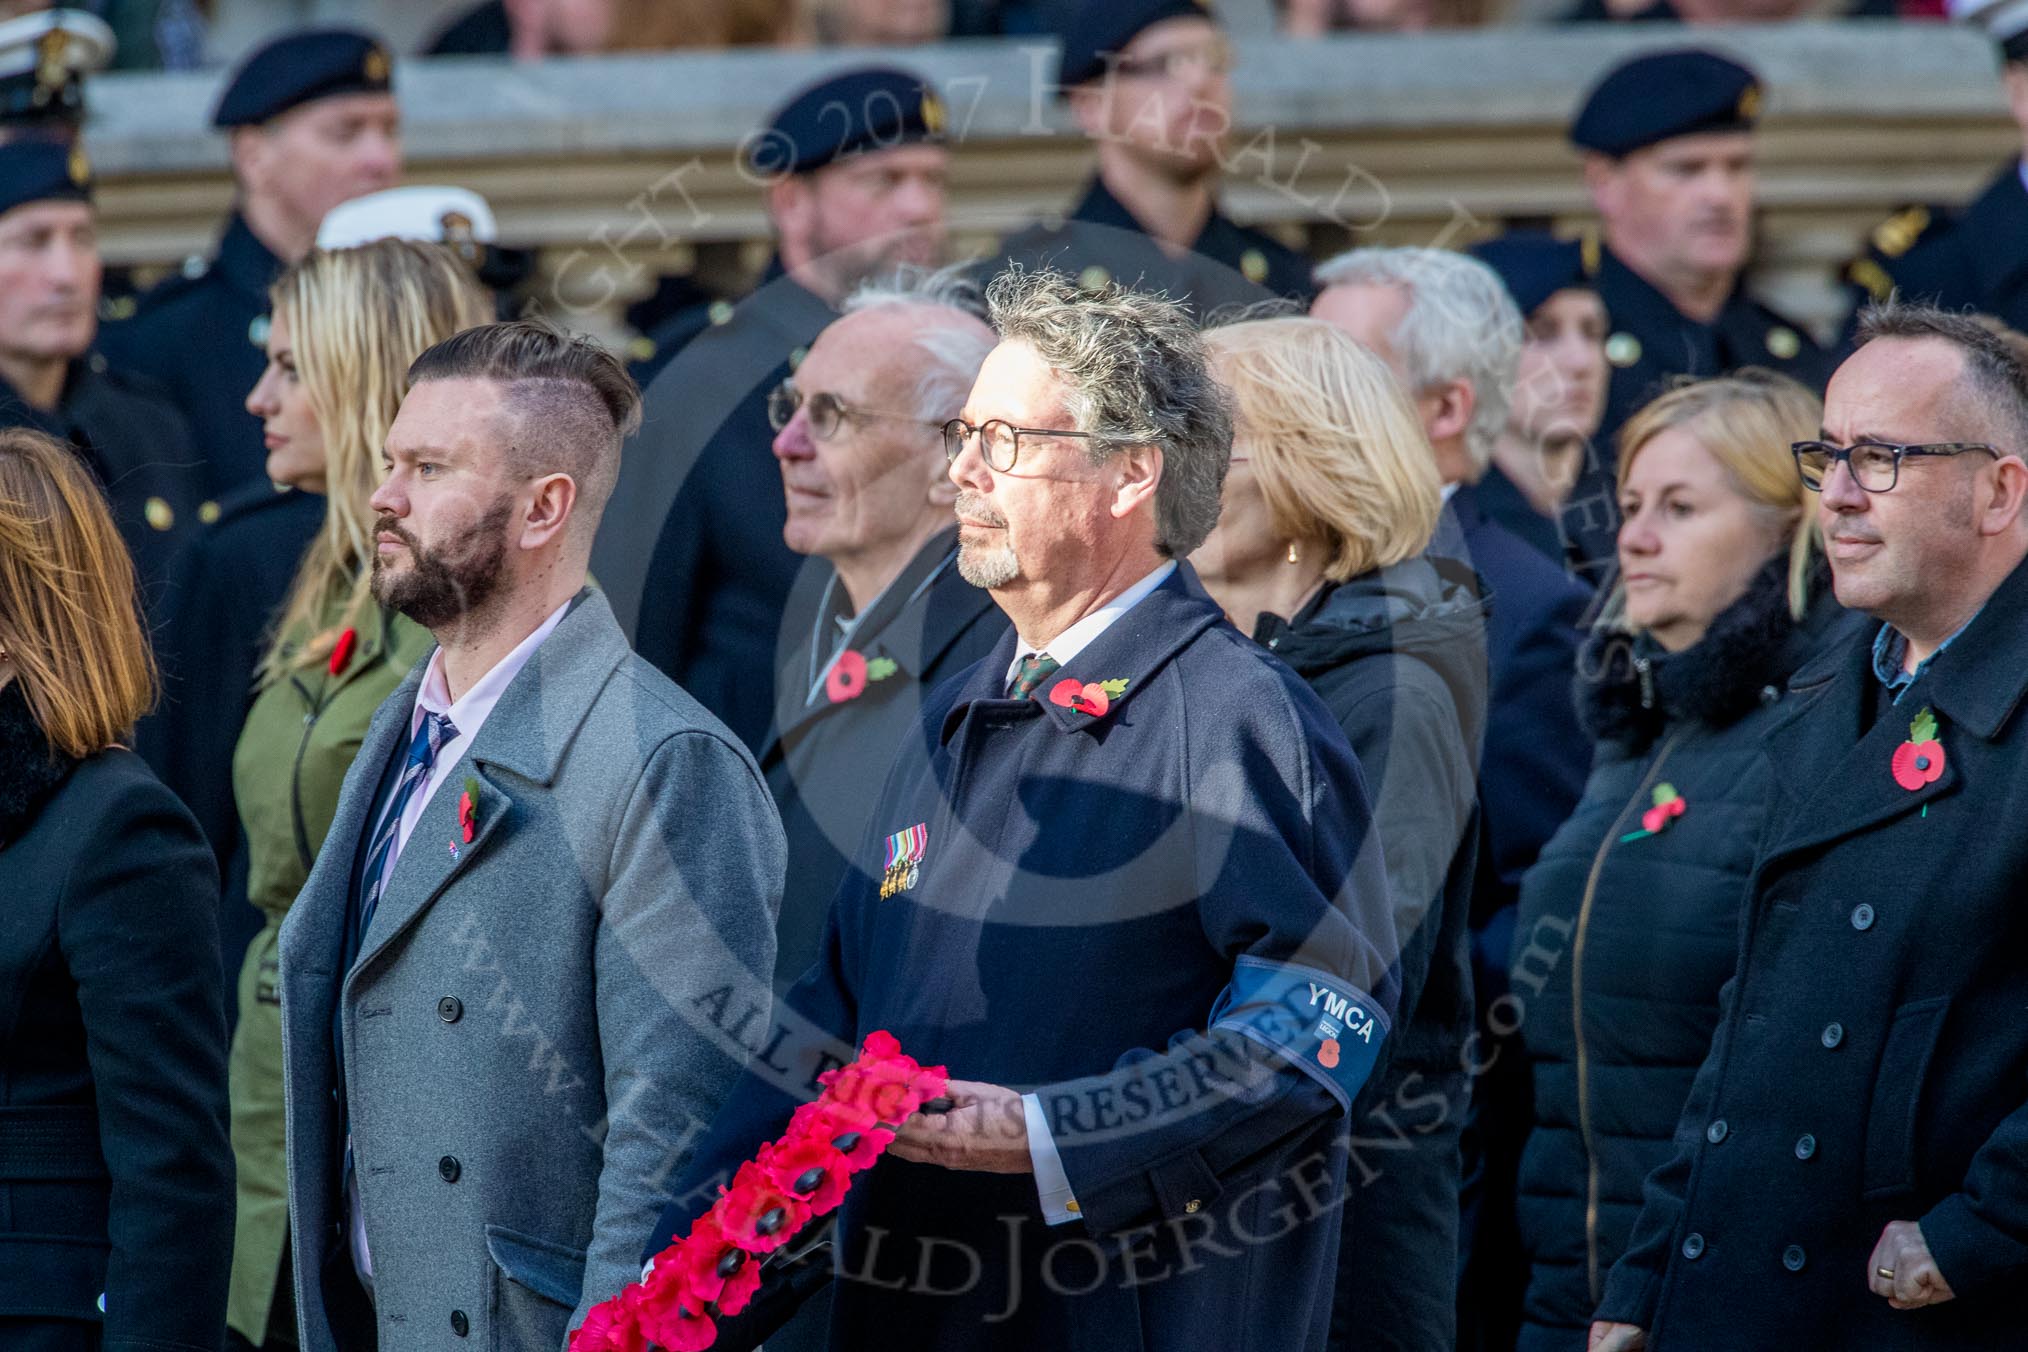 YMCA (Group M49, 30 members) during the Royal British Legion March Past on Remembrance Sunday at the Cenotaph, Whitehall, Westminster, London, 11 November 2018, 12:31.